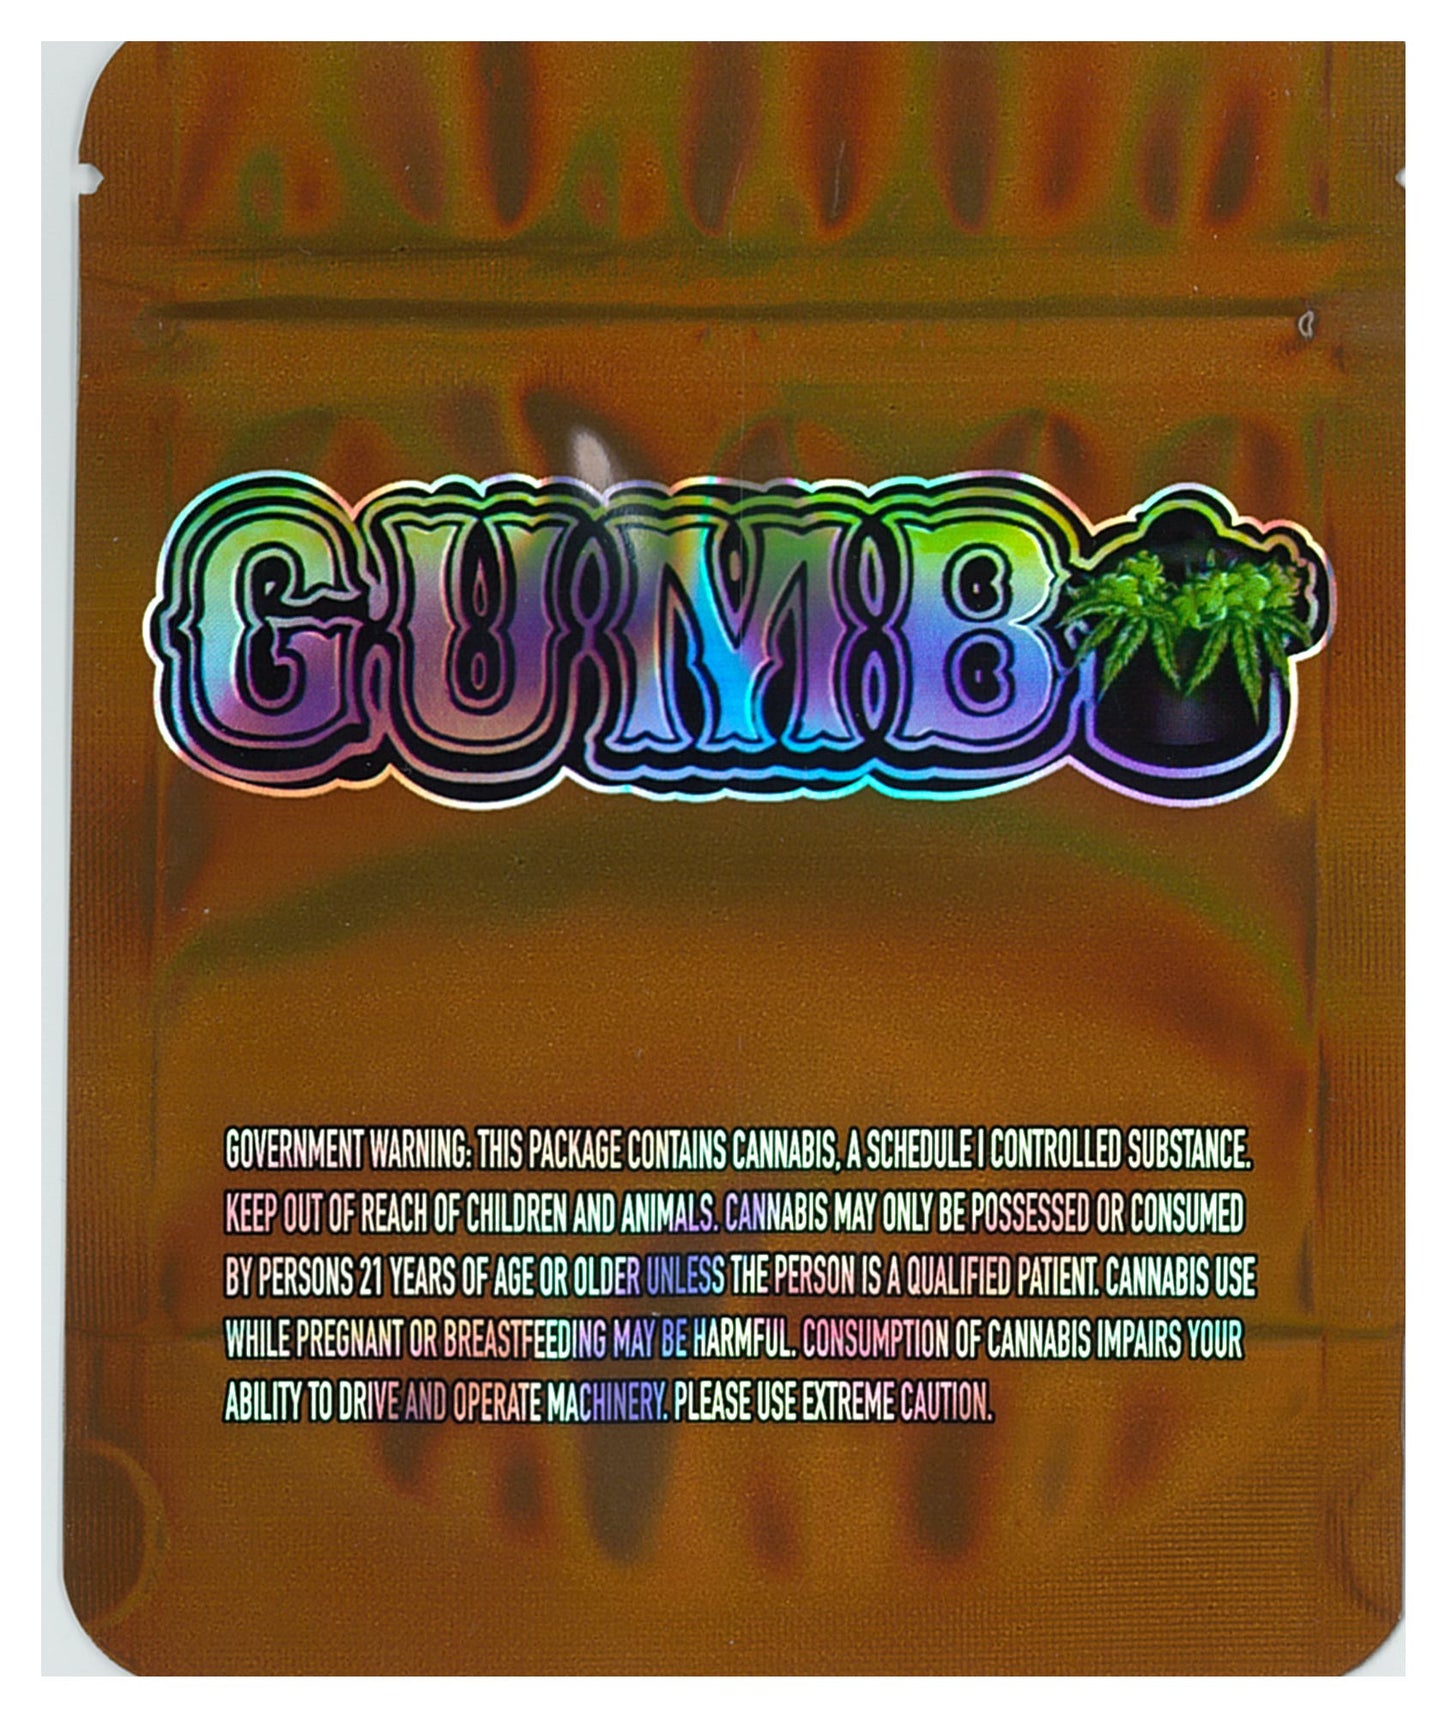 1/8 OZ -  MYLAR BAGS (100 CT) - "GUMBO NOTHING BUT FIRE"